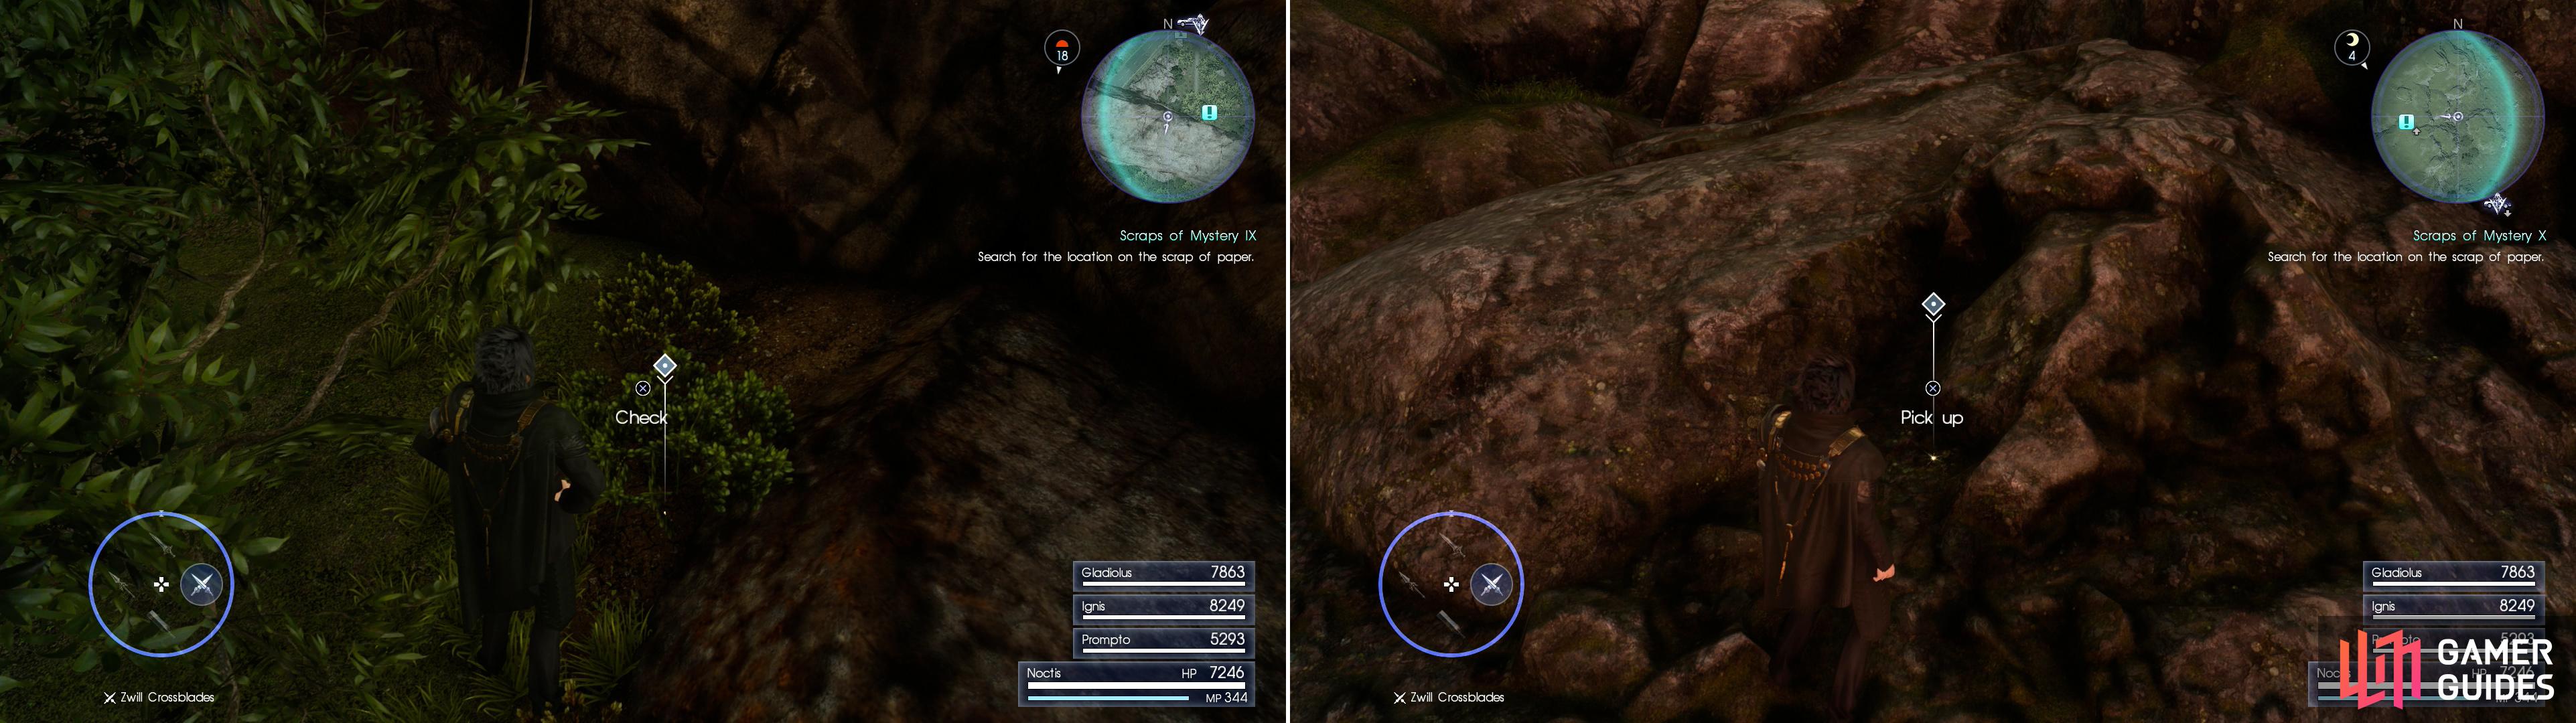 Search north of the Daurell Caverns dungeon to find Sylvester’s Map Piece I (left), while on some rocks north-west of the Coernix Station - Cauthess you’ll locate Sylvester’s Map Piece J (right).